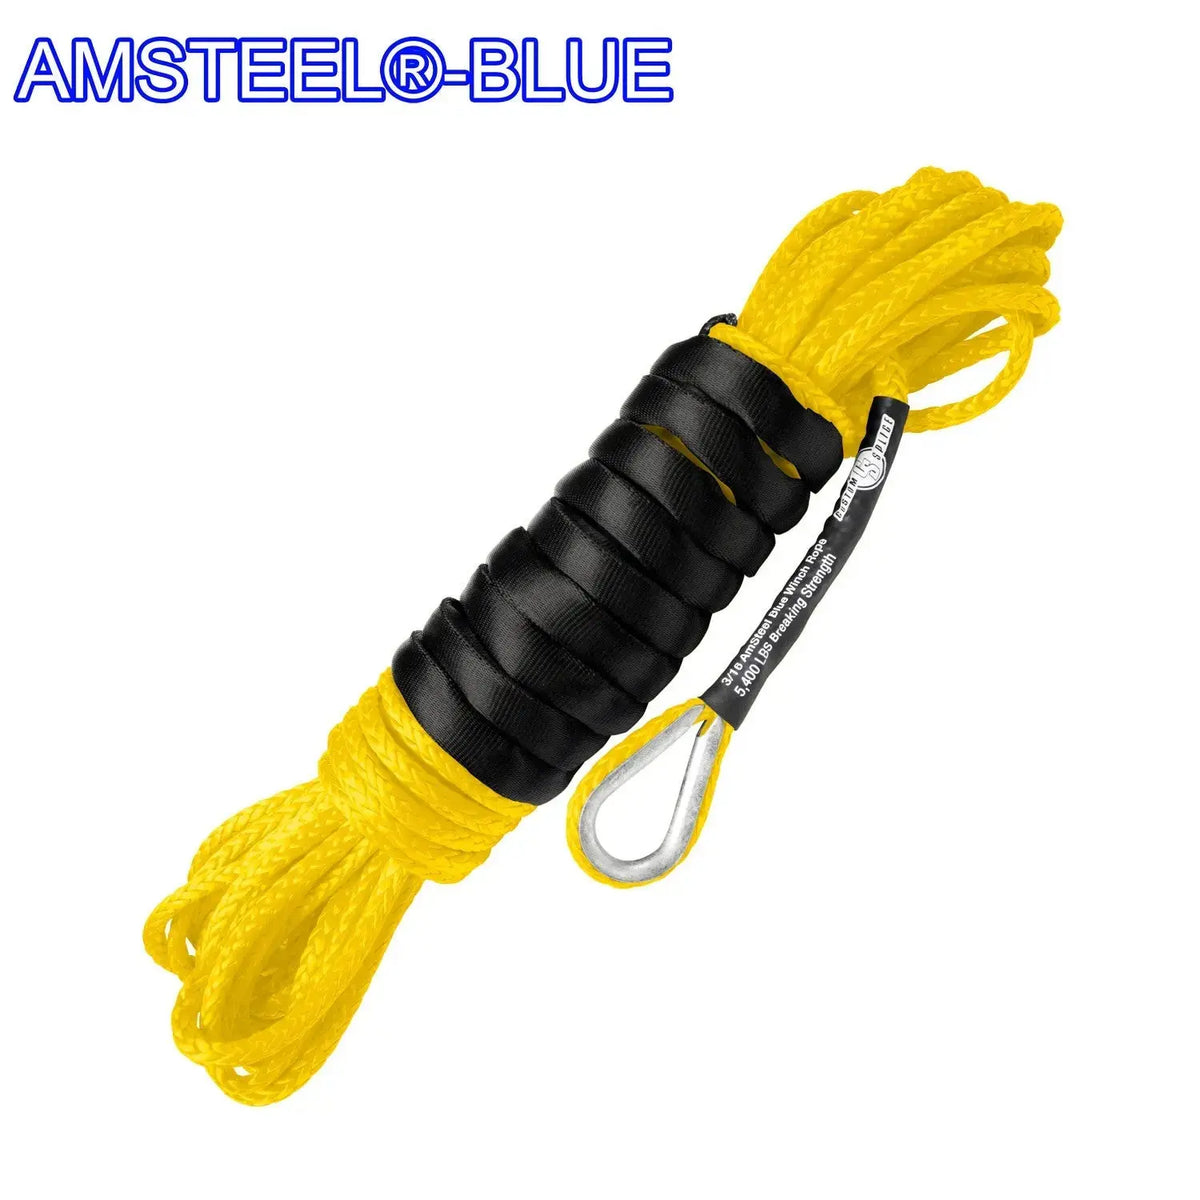 3/16" X 50' Main Line Winch Rope - AmSteel Blue Yellow-Tube-Thimble-with-Excel-Sling-Hook Custom Splice